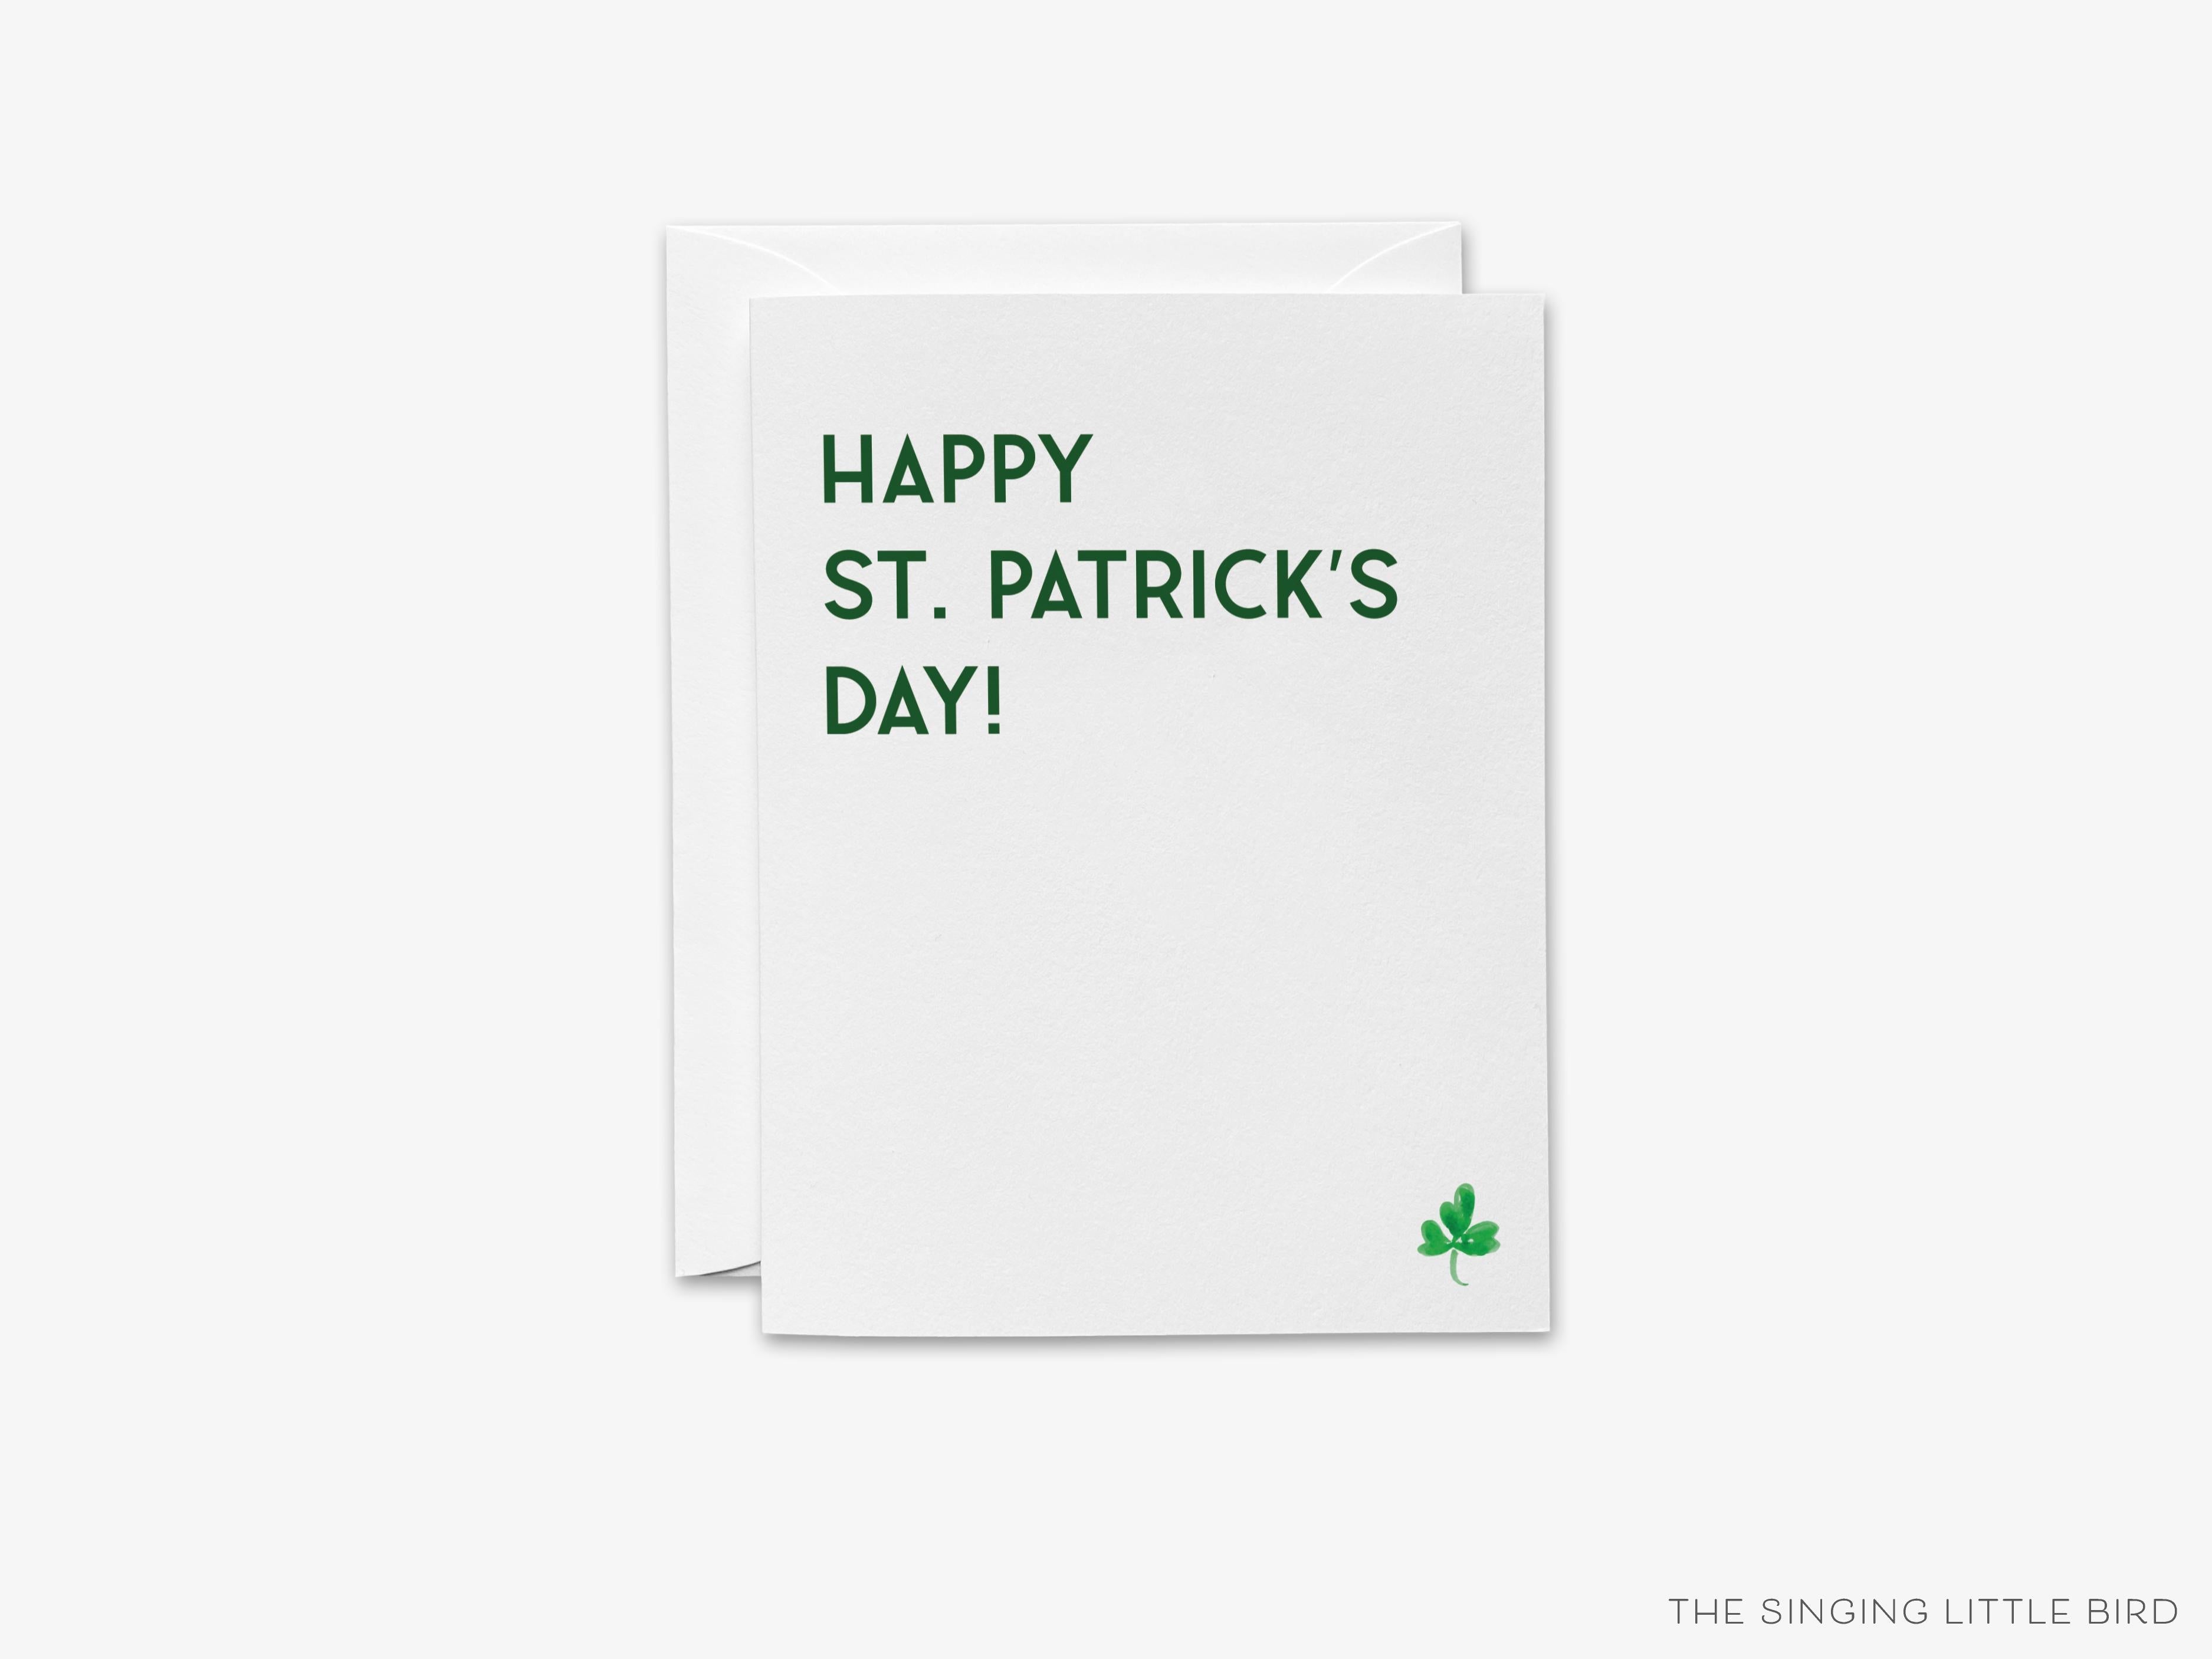 Happy St. Patrick's Day Greeting Card-These folded spring cards are 4.25x5.5 and feature our hand-painted watercolor three leaf clover, printed in the USA on 100lb textured stock. They come with a White envelope and make a lovely card to say Happy St. Patrick's Day to your family and friends. -The Singing Little Bird